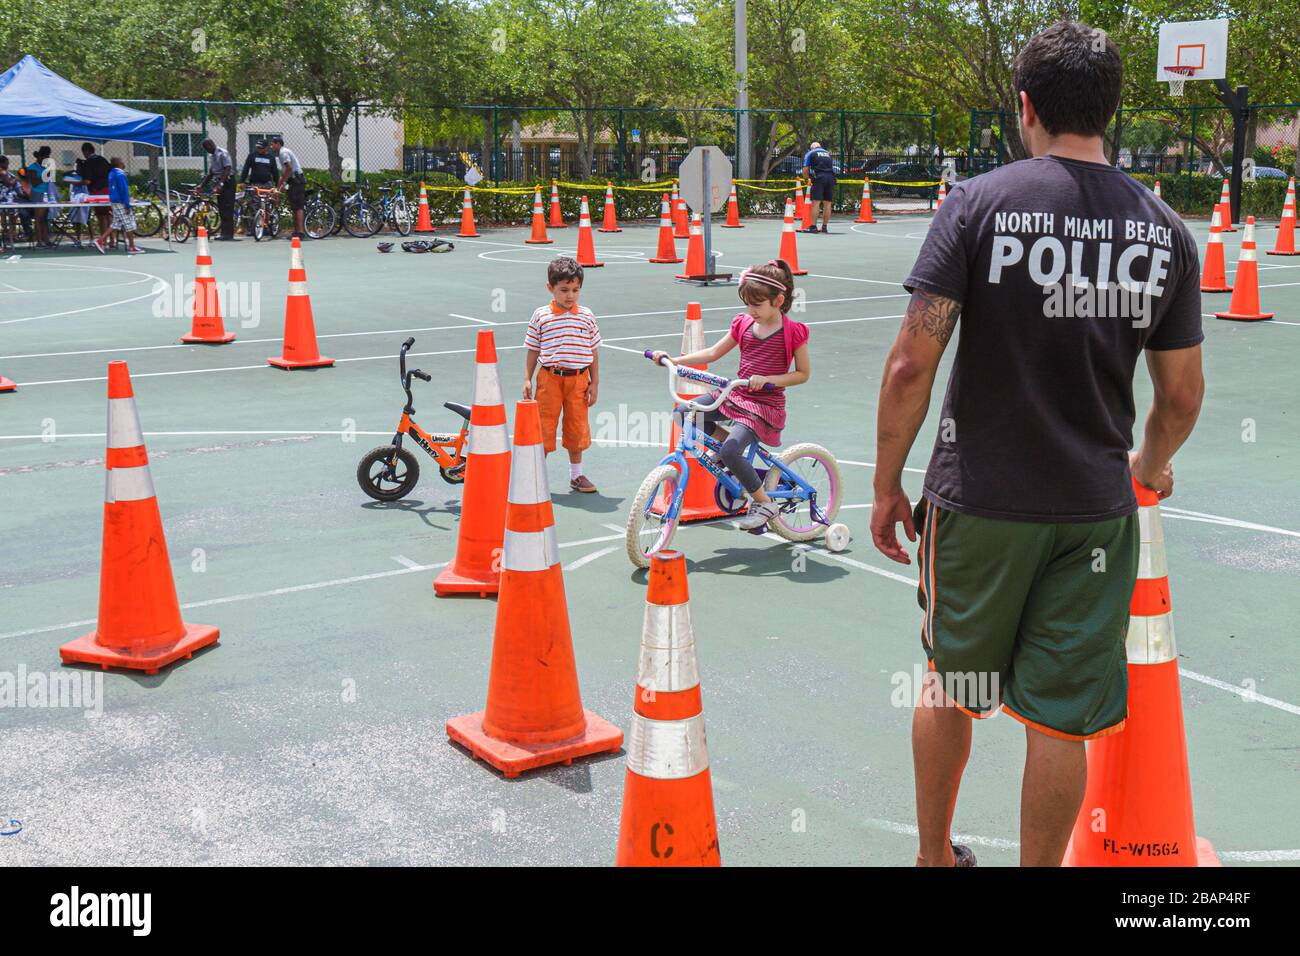 North Miami Beach Florida,Police Community Unit Bicycle Rodeo,riding obstacle course,orange traffic cones,girl girls,youngster,female kids children bo Stock Photo